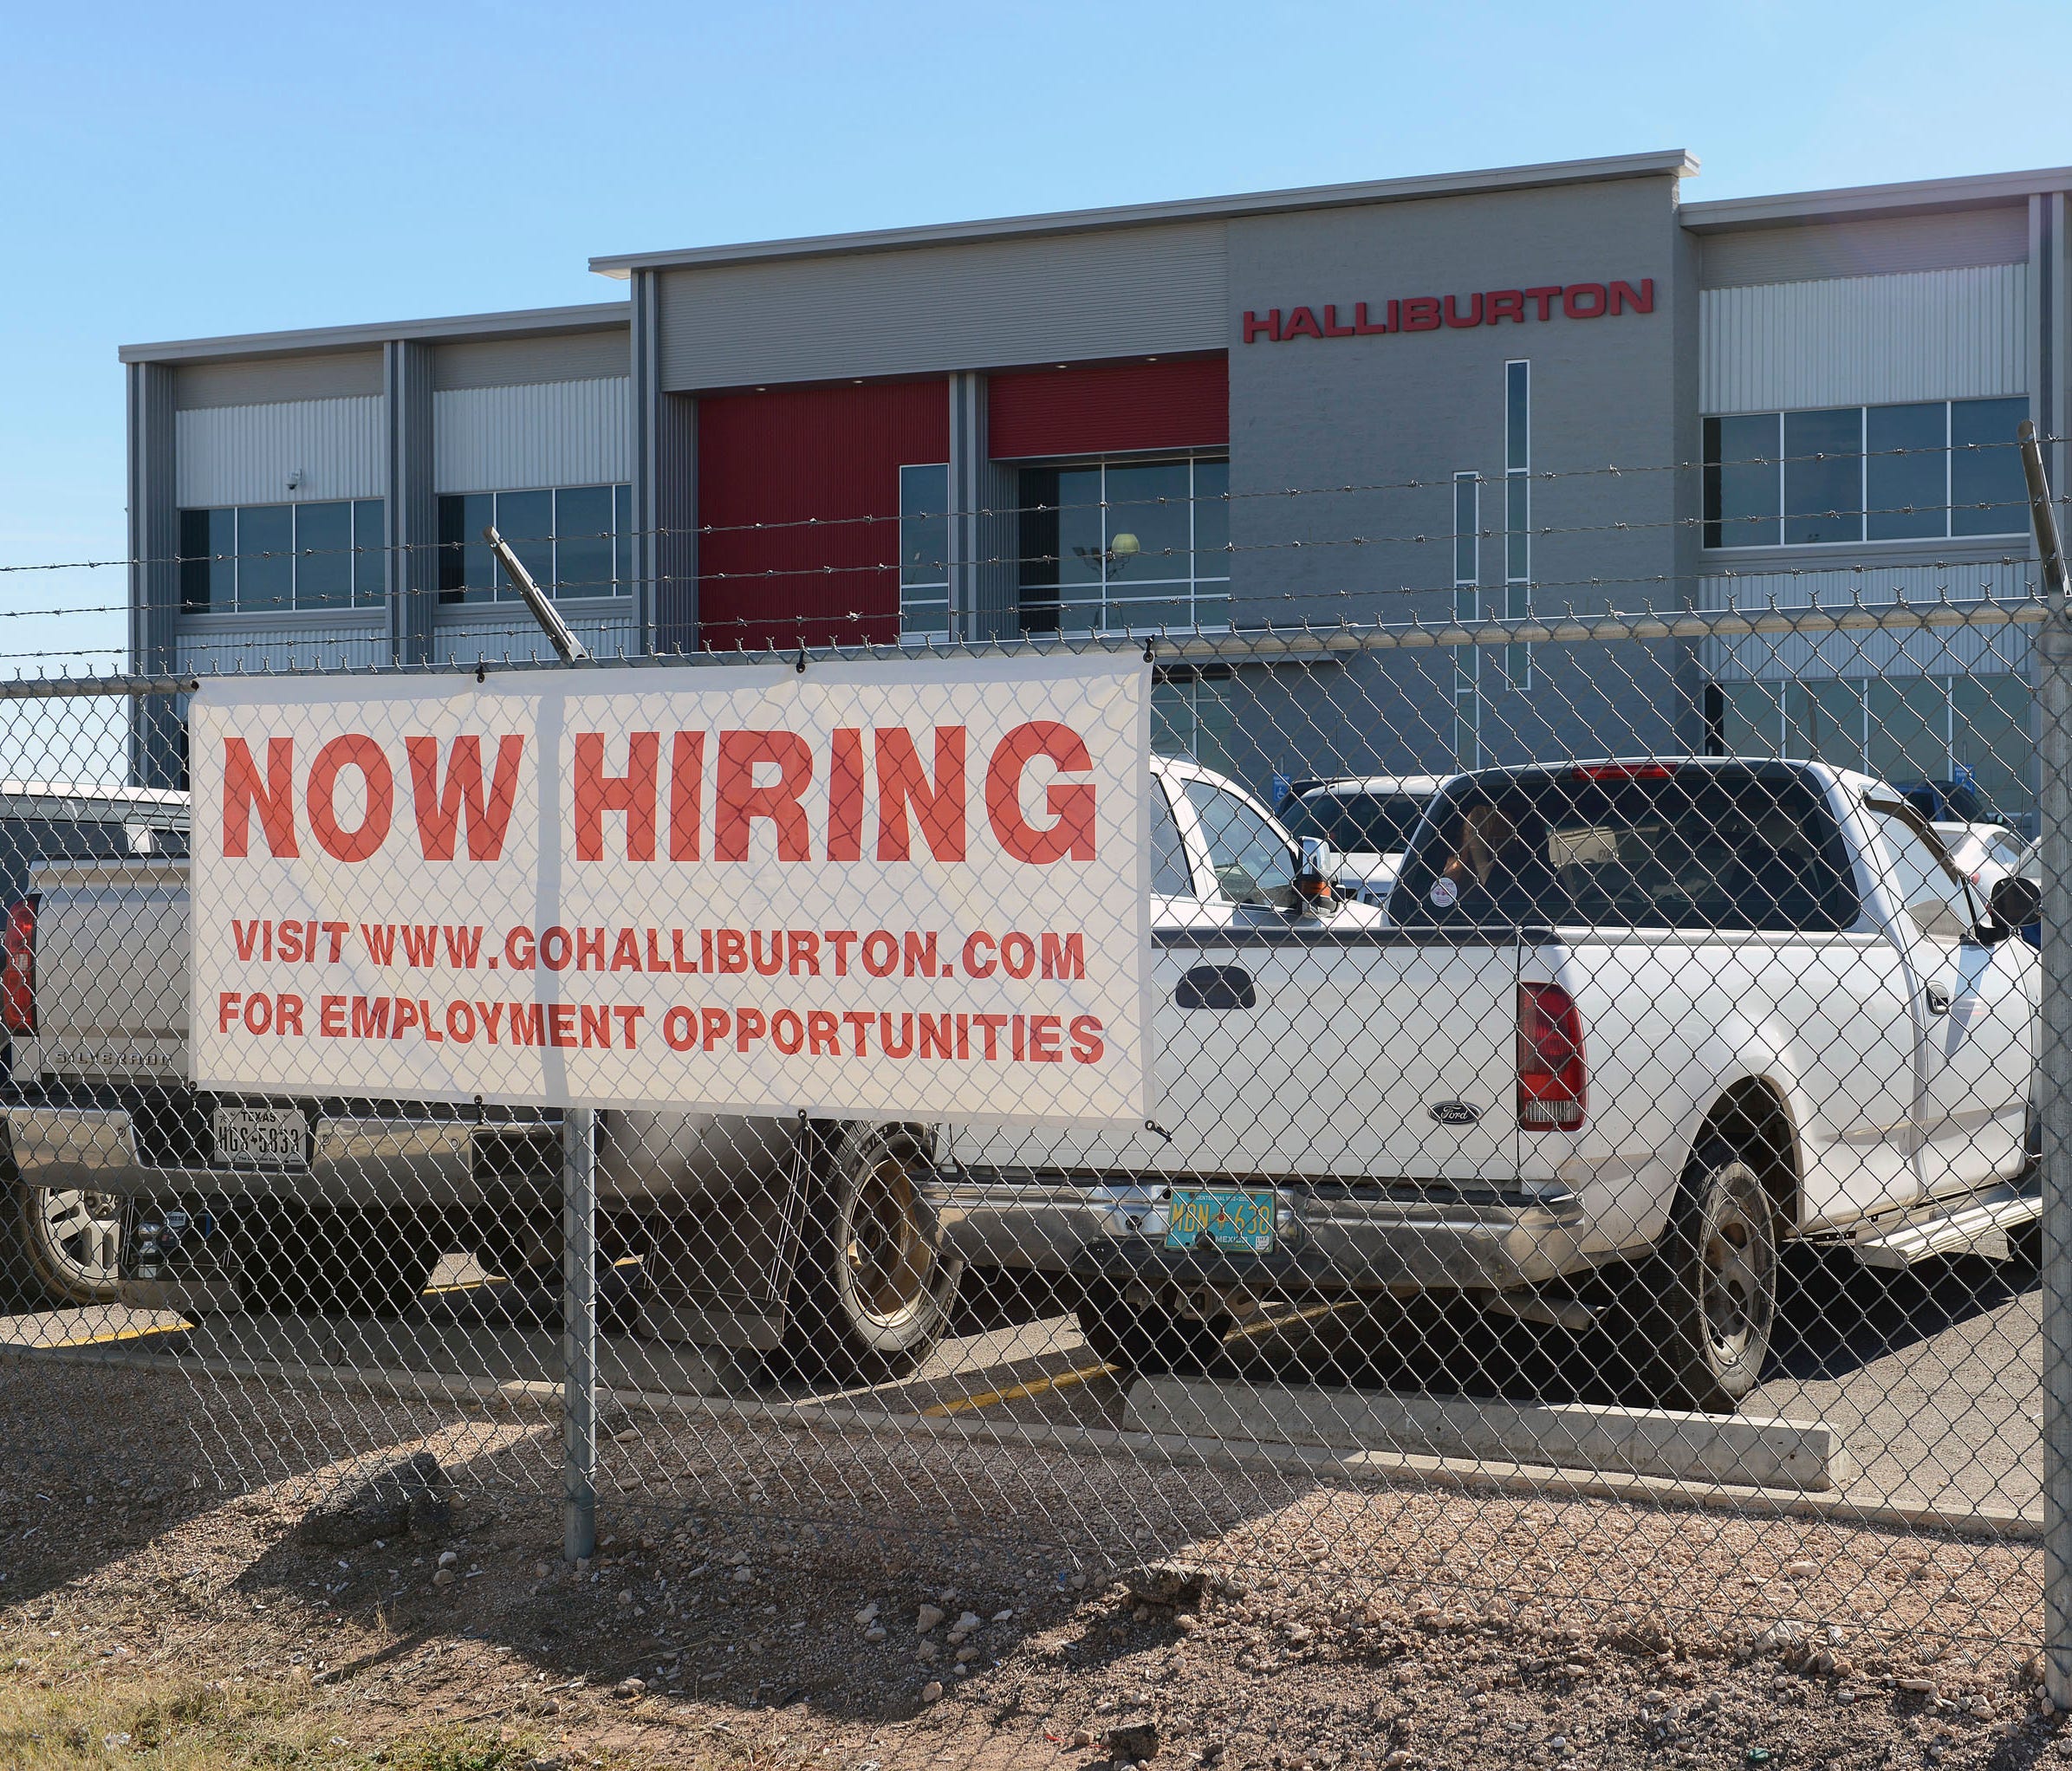 Prospects for employment in the oil field are beginning to have positive signs as indicated by this hiring sign in front of the Halliburton facility in Odessa, Texas.